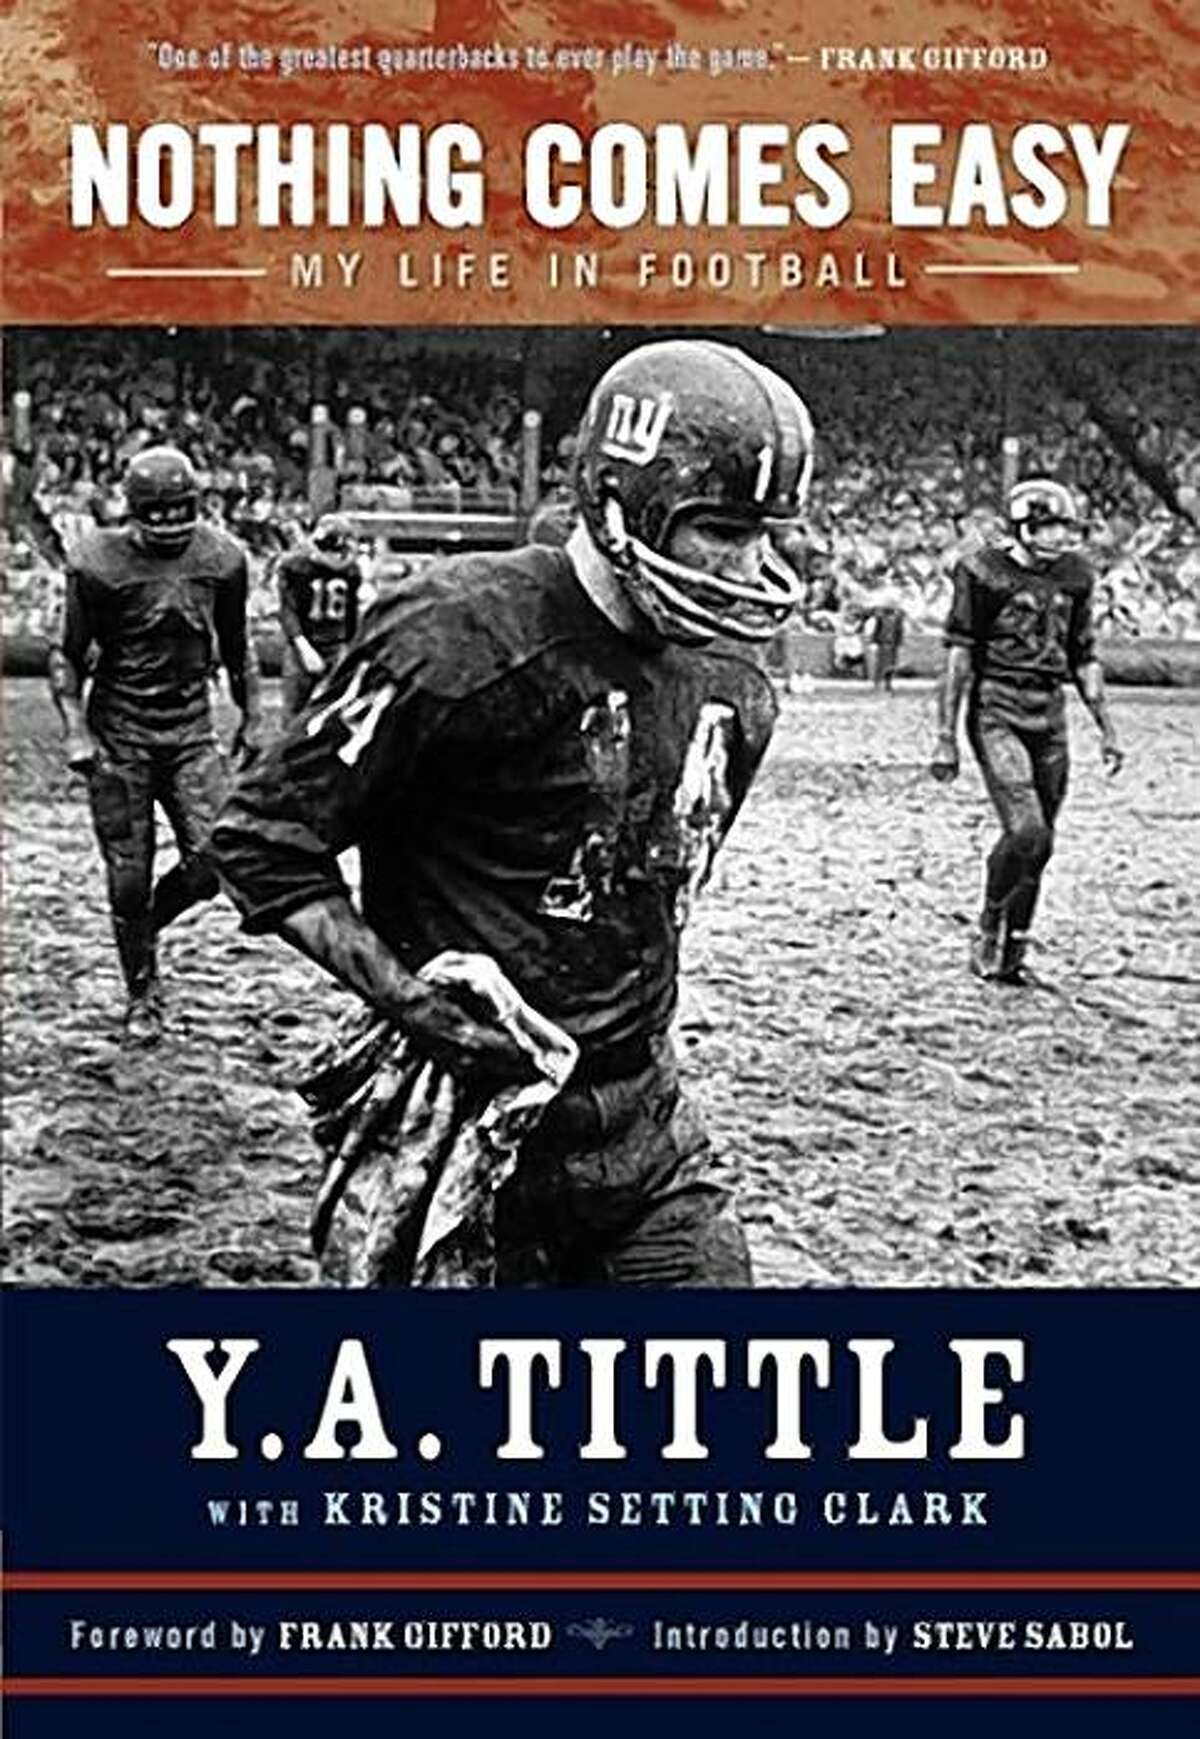 Book cover for "Nothing Comes Easy" by Y.A. Tittle.